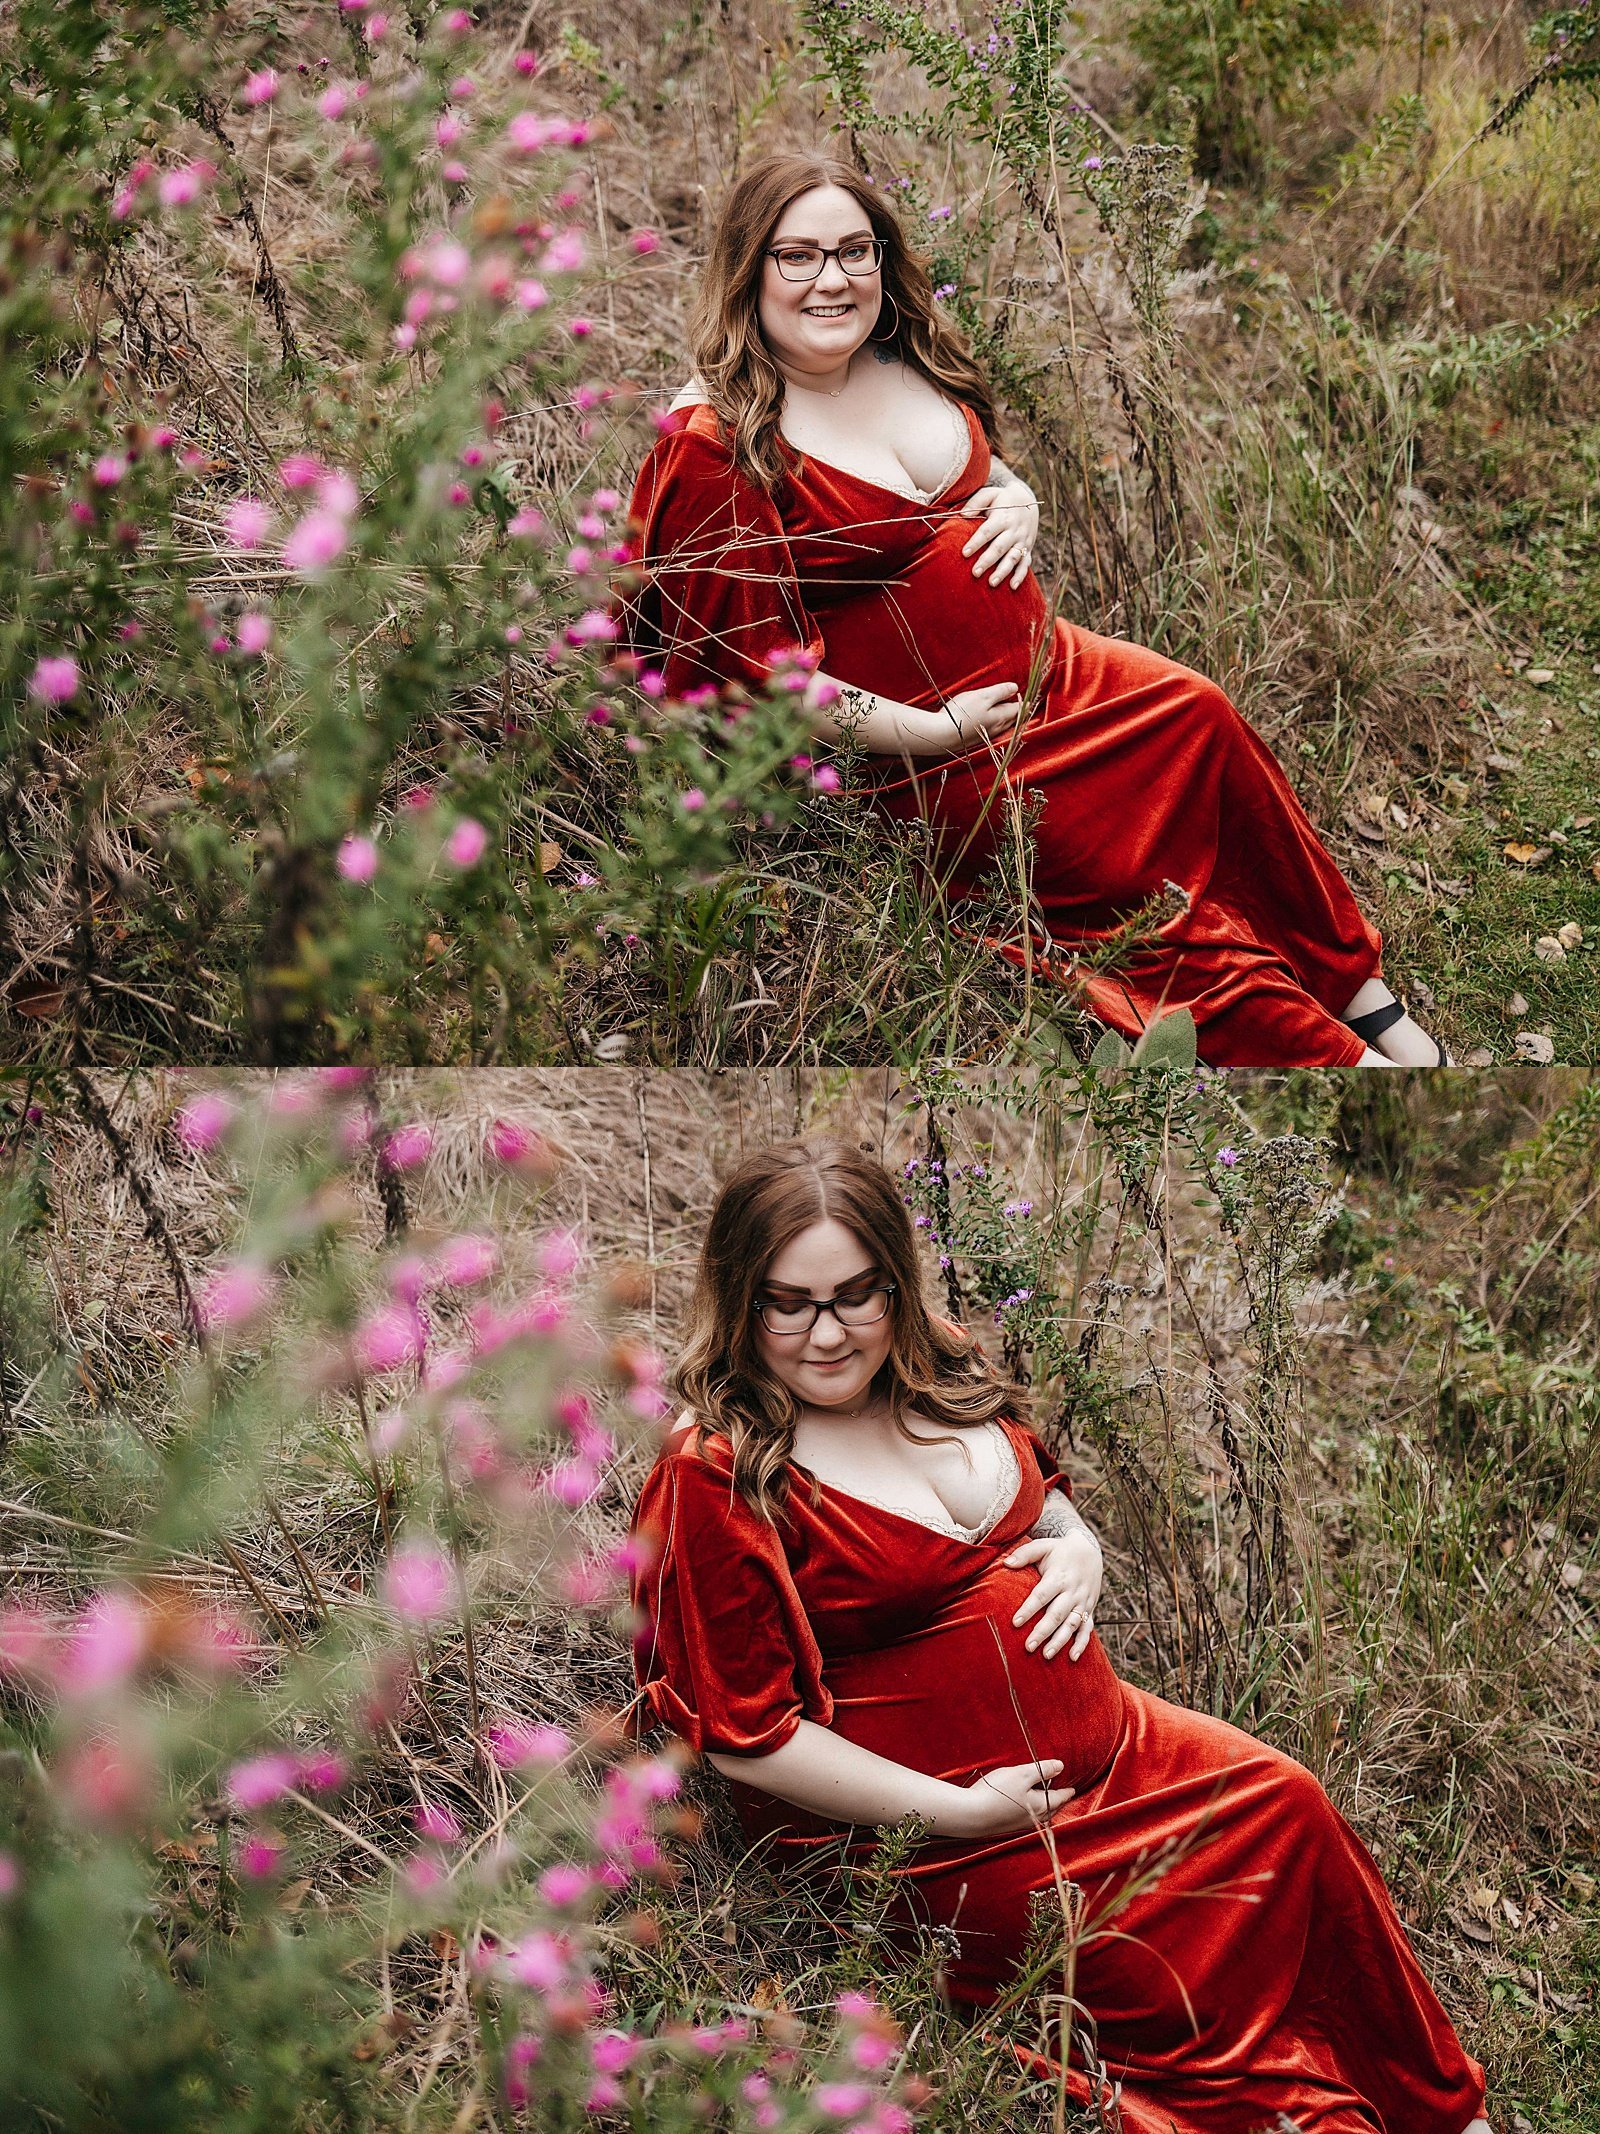  Pregnant woman sitting among flowers at a park for her maternity session in Minneapolis.  